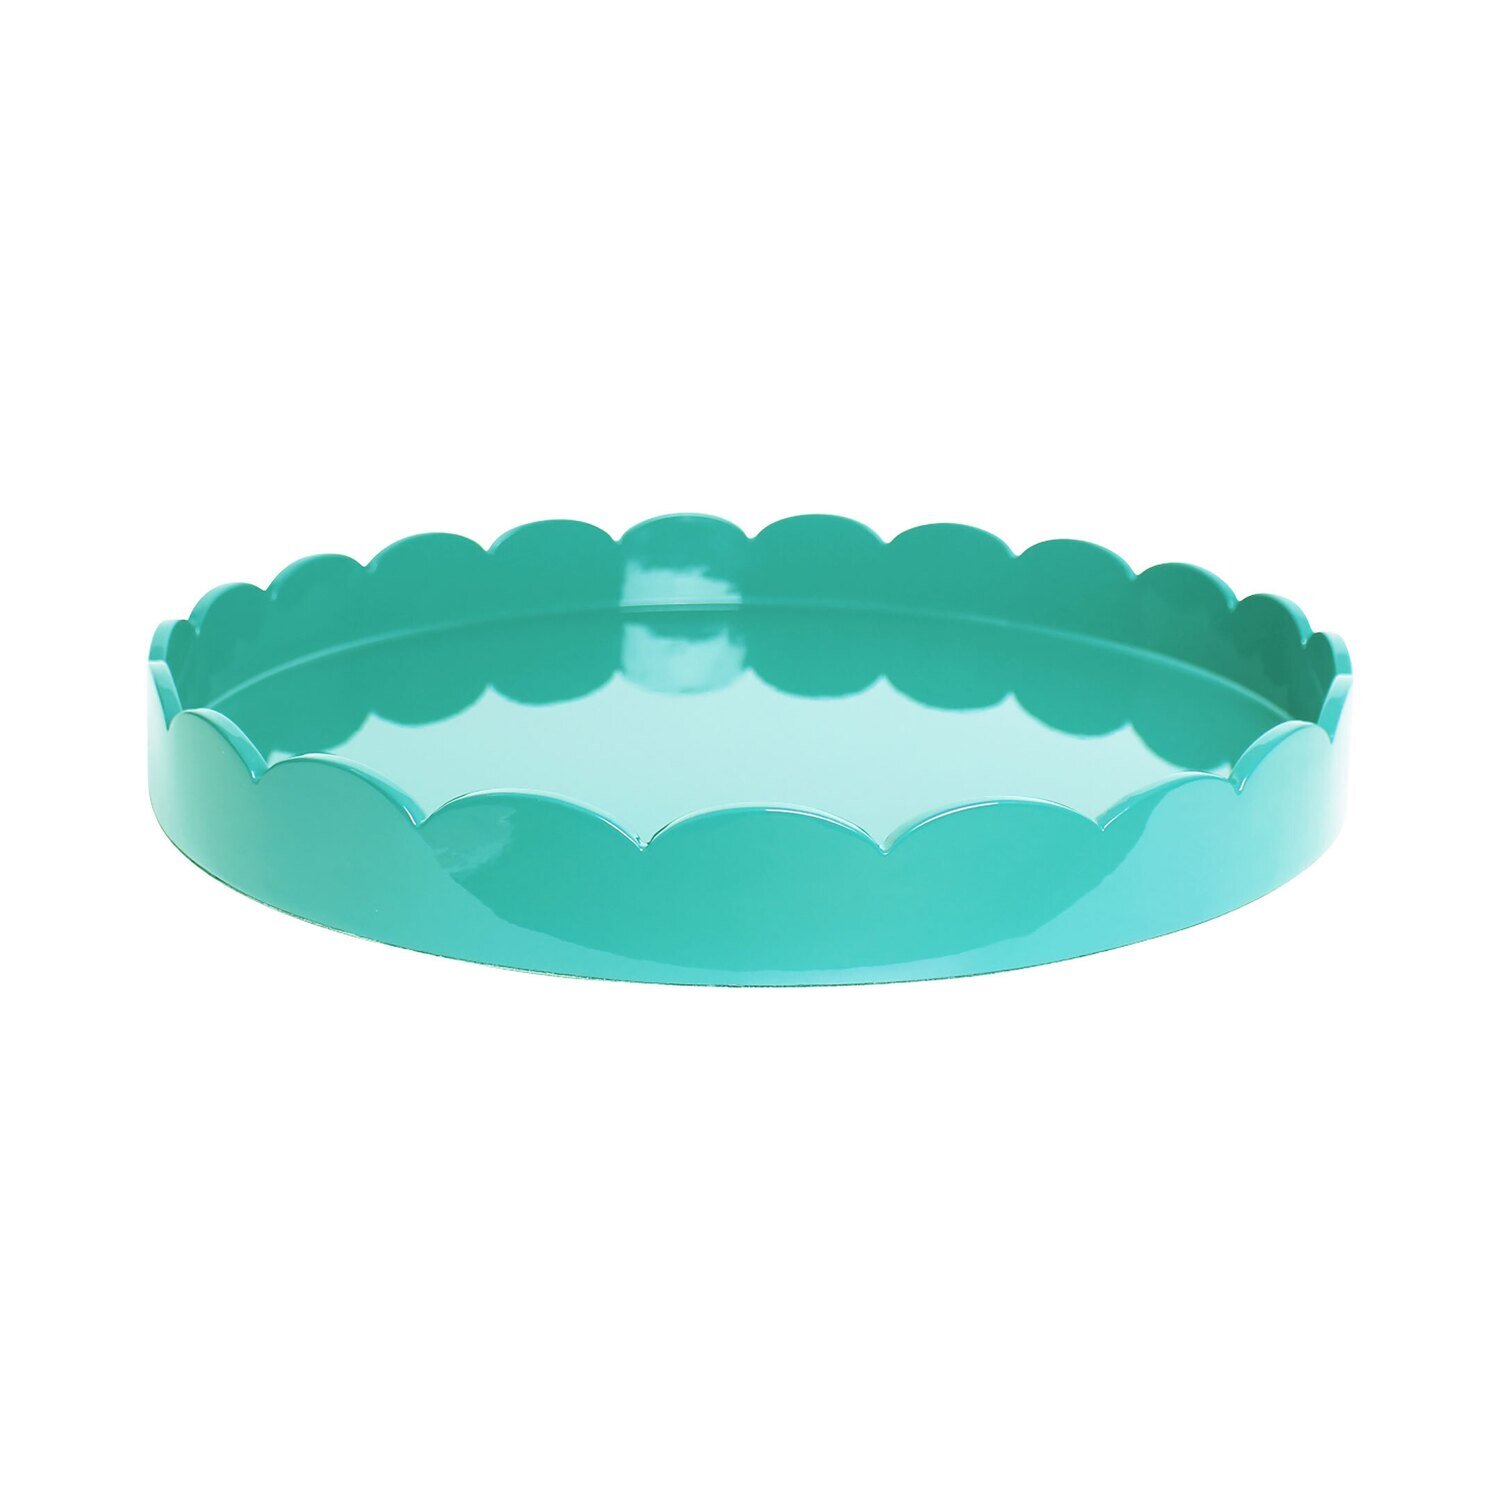 Addison Ross Turquoise Round Medium Lacquered Scallop Tray 16 x 16 Inch Lacquer TR7006